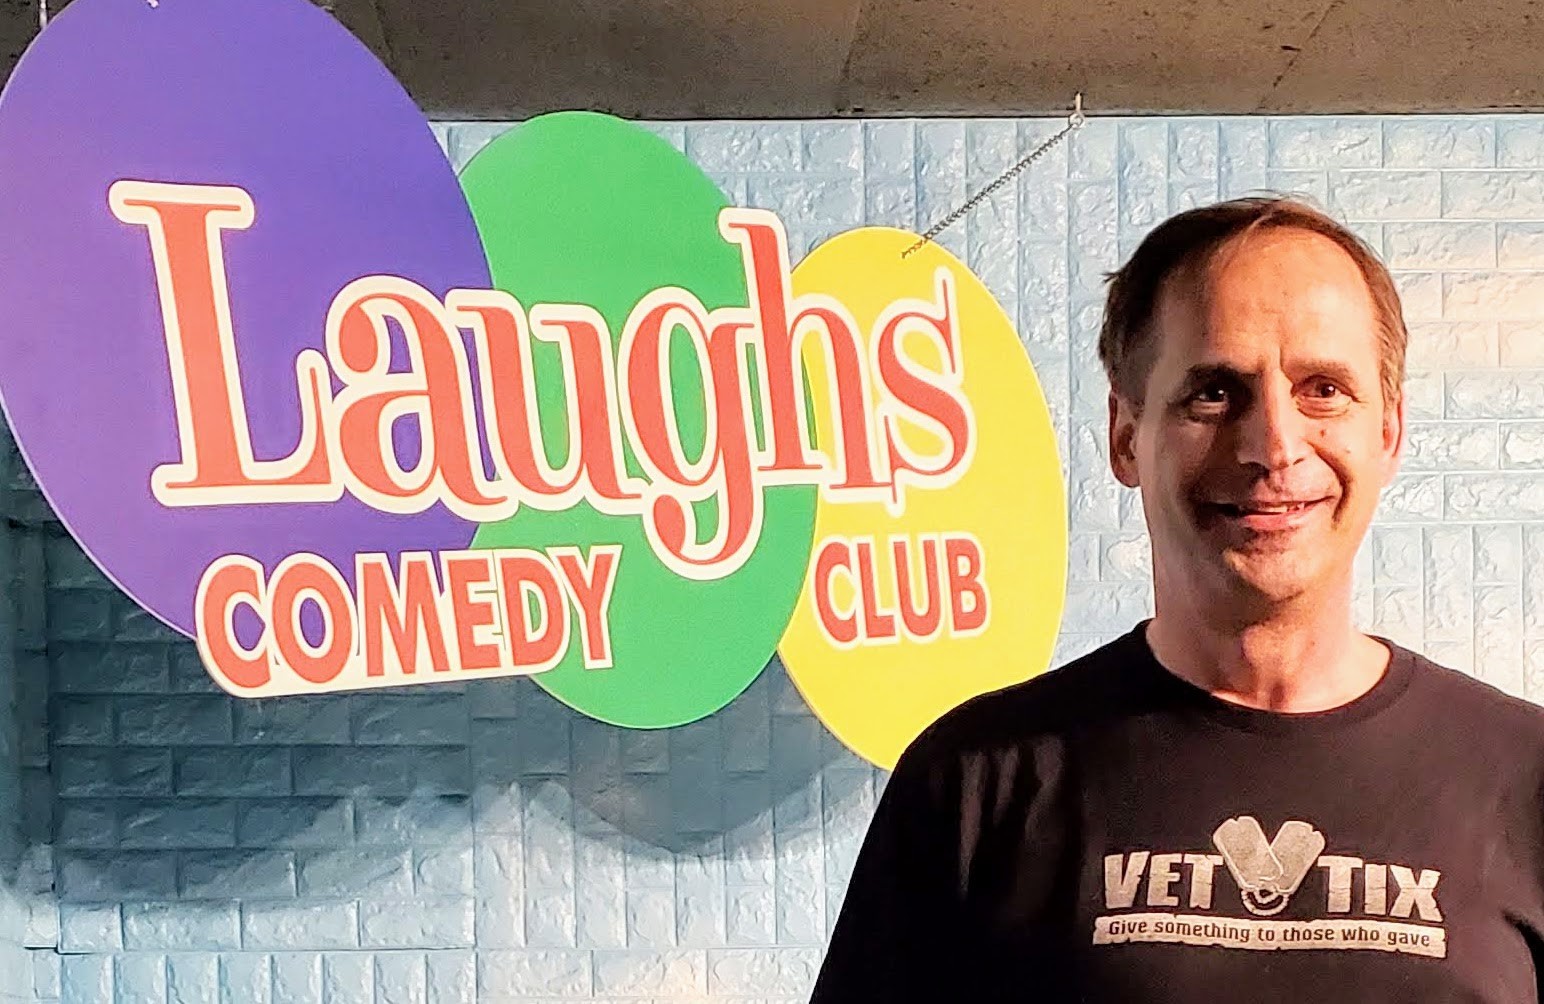 Event Feedback: Laughs Comedy Club - Friday 10 PM - 21+